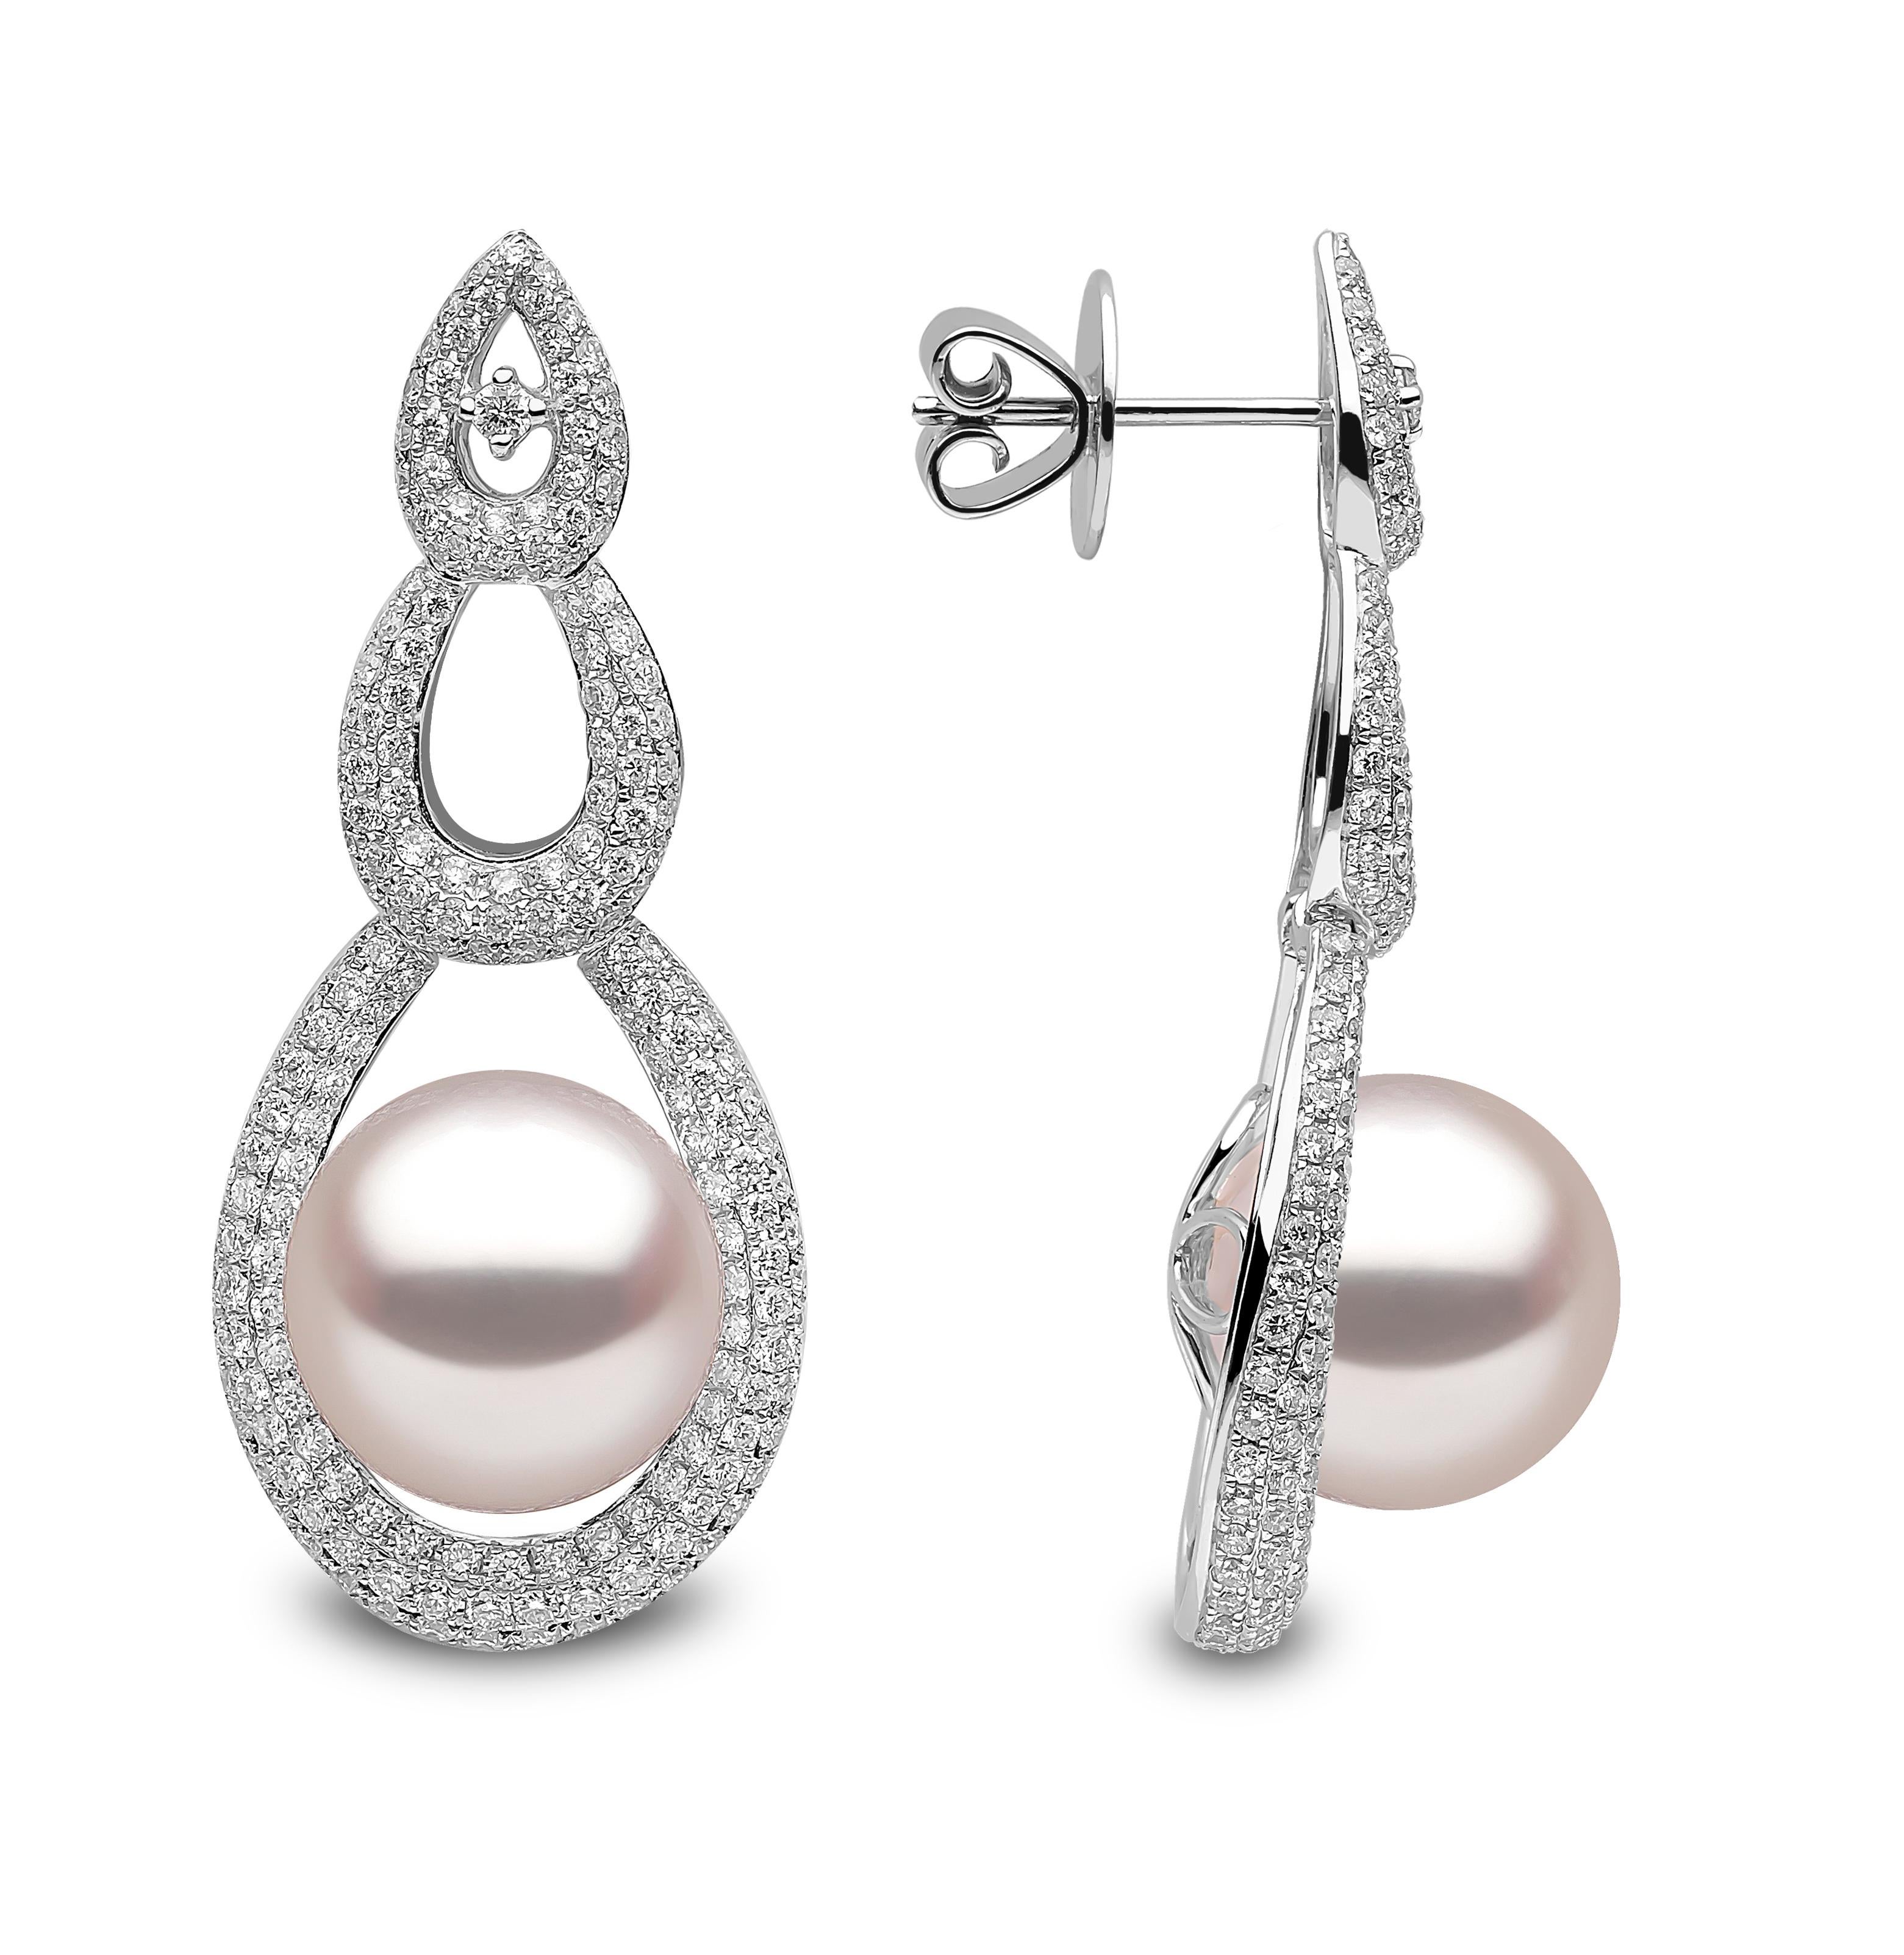 These extremely elegant earrings by Yoko London feature a winning combination of lustrous South Sea pearls and fine diamonds. Set in 18 Karat white gold, these earrings are truly spectacular and would complete any evening look perfectly – adding a